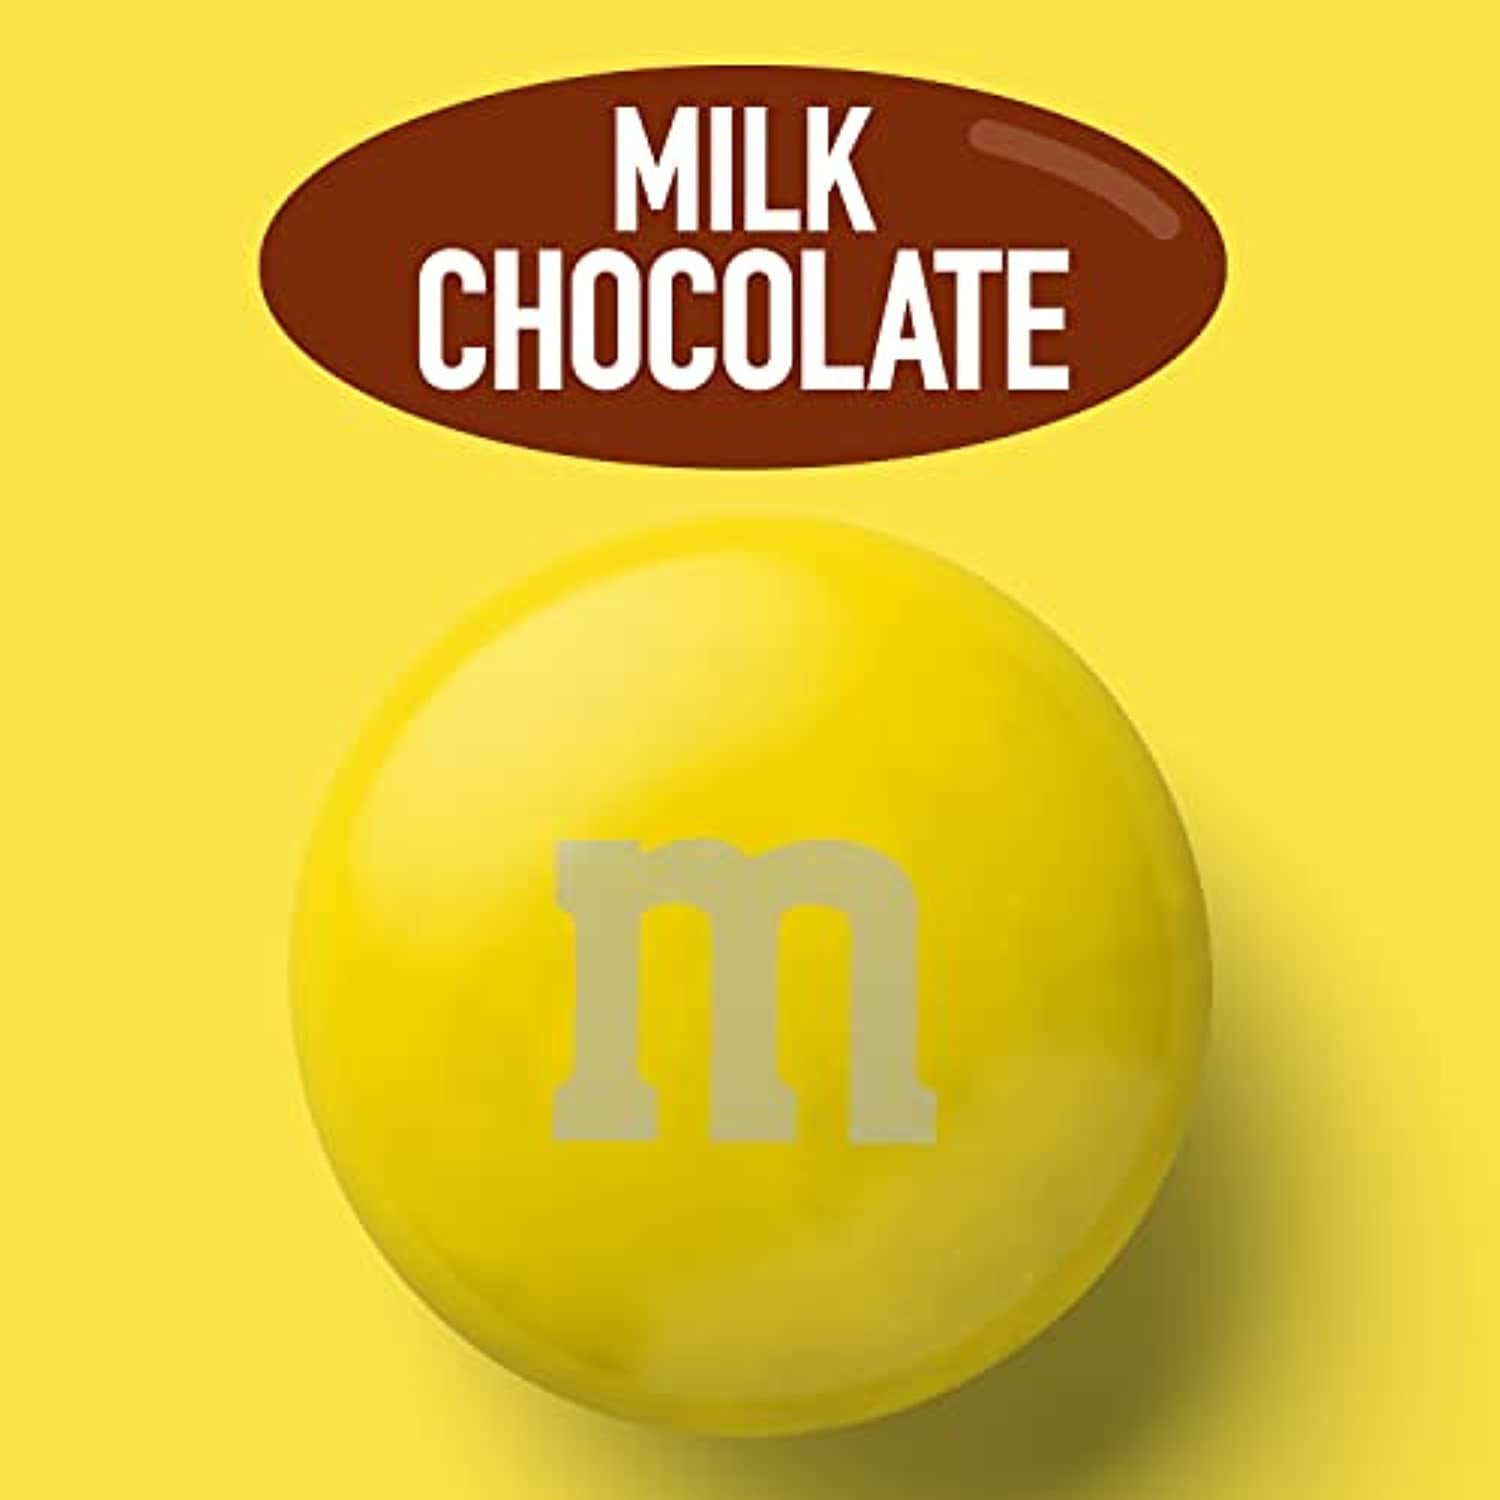 Brown M&M's Chocolate Candy • M&M's Chocolate Candy • Chocolate Candy  Buttons & Lentils • Bulk Candy • Oh! Nuts®